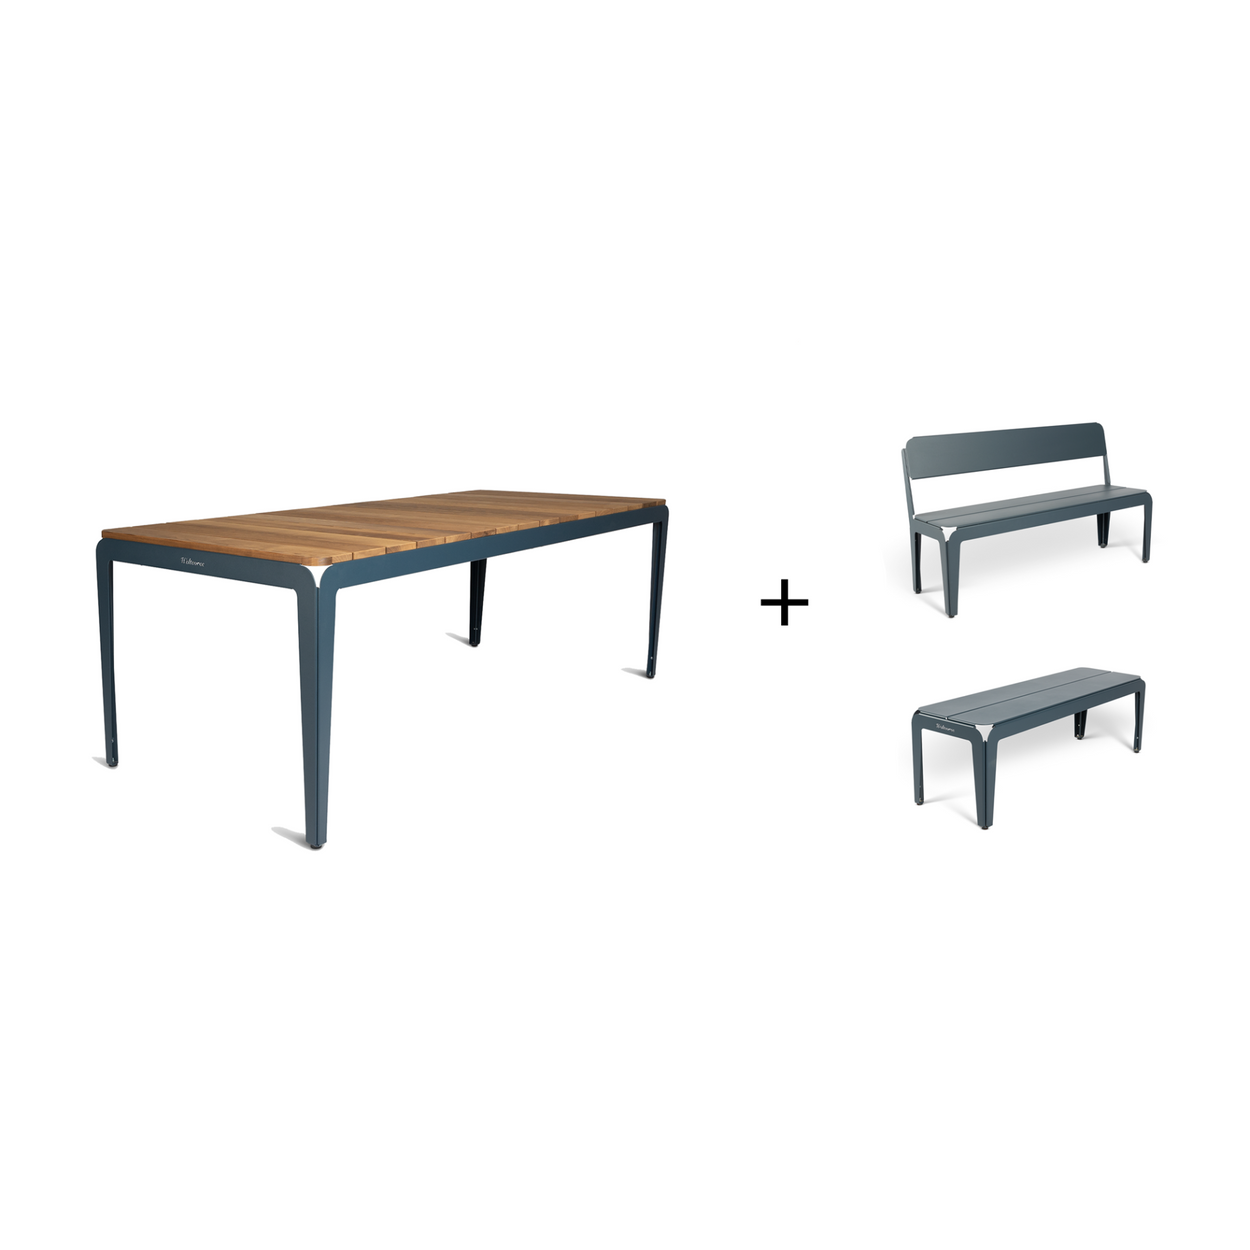 Bended table Wood 220 inclusief benches - 3 combinaties